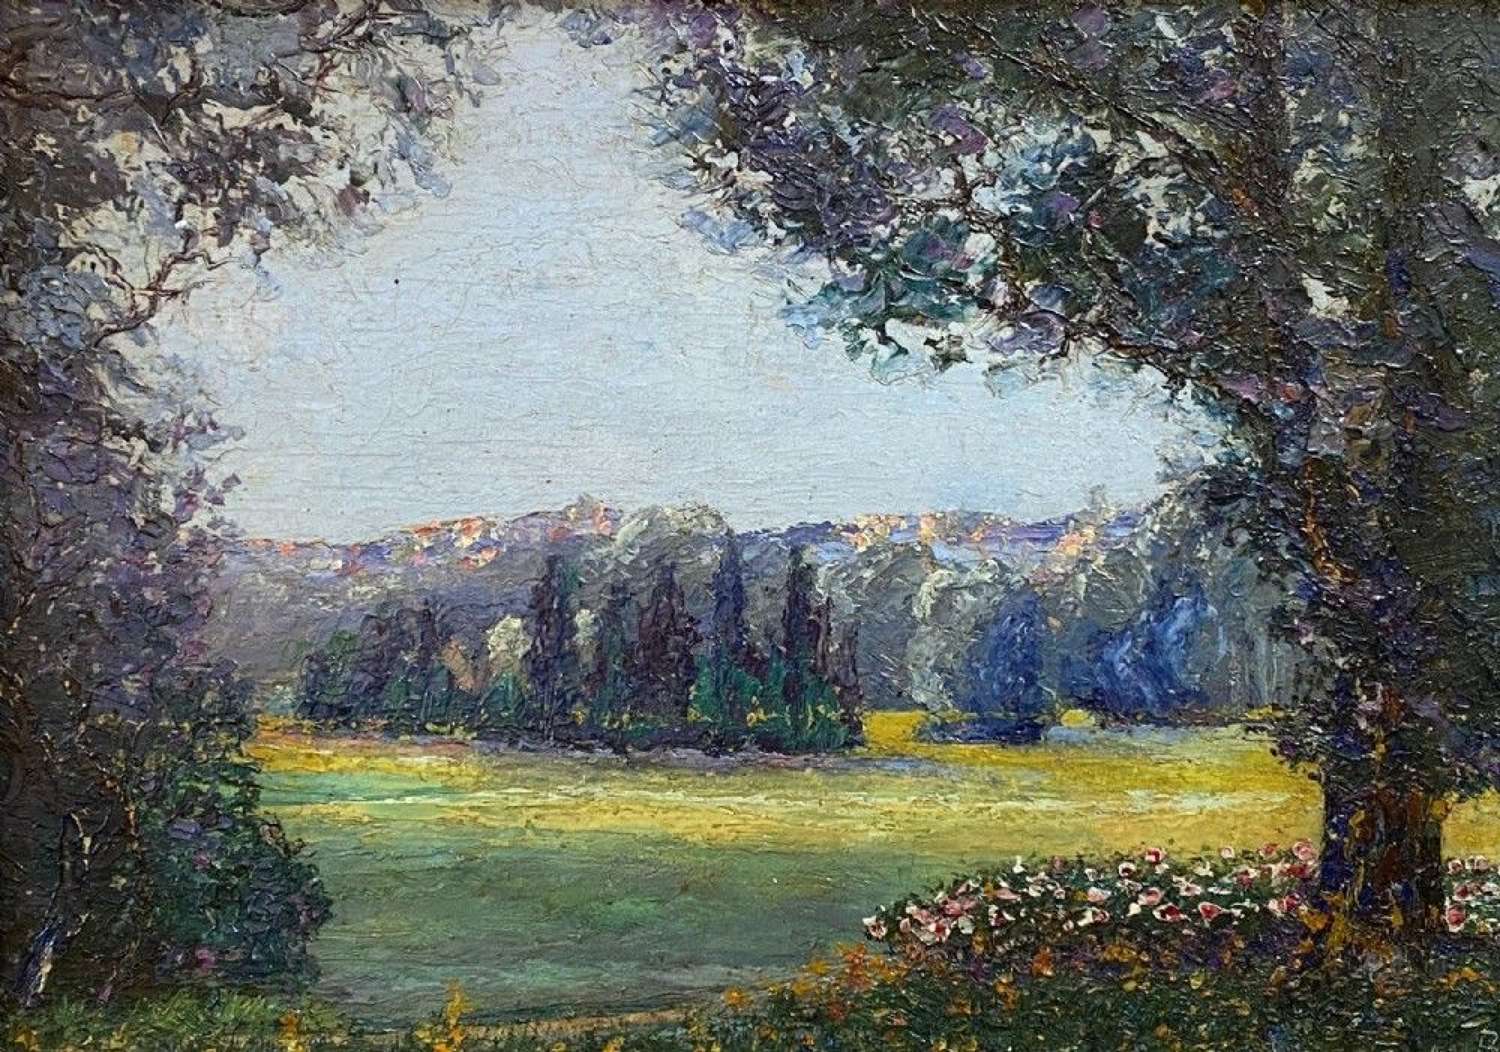 Joys Of May, Spring In The Valley, French Impressionist Landscape 1914